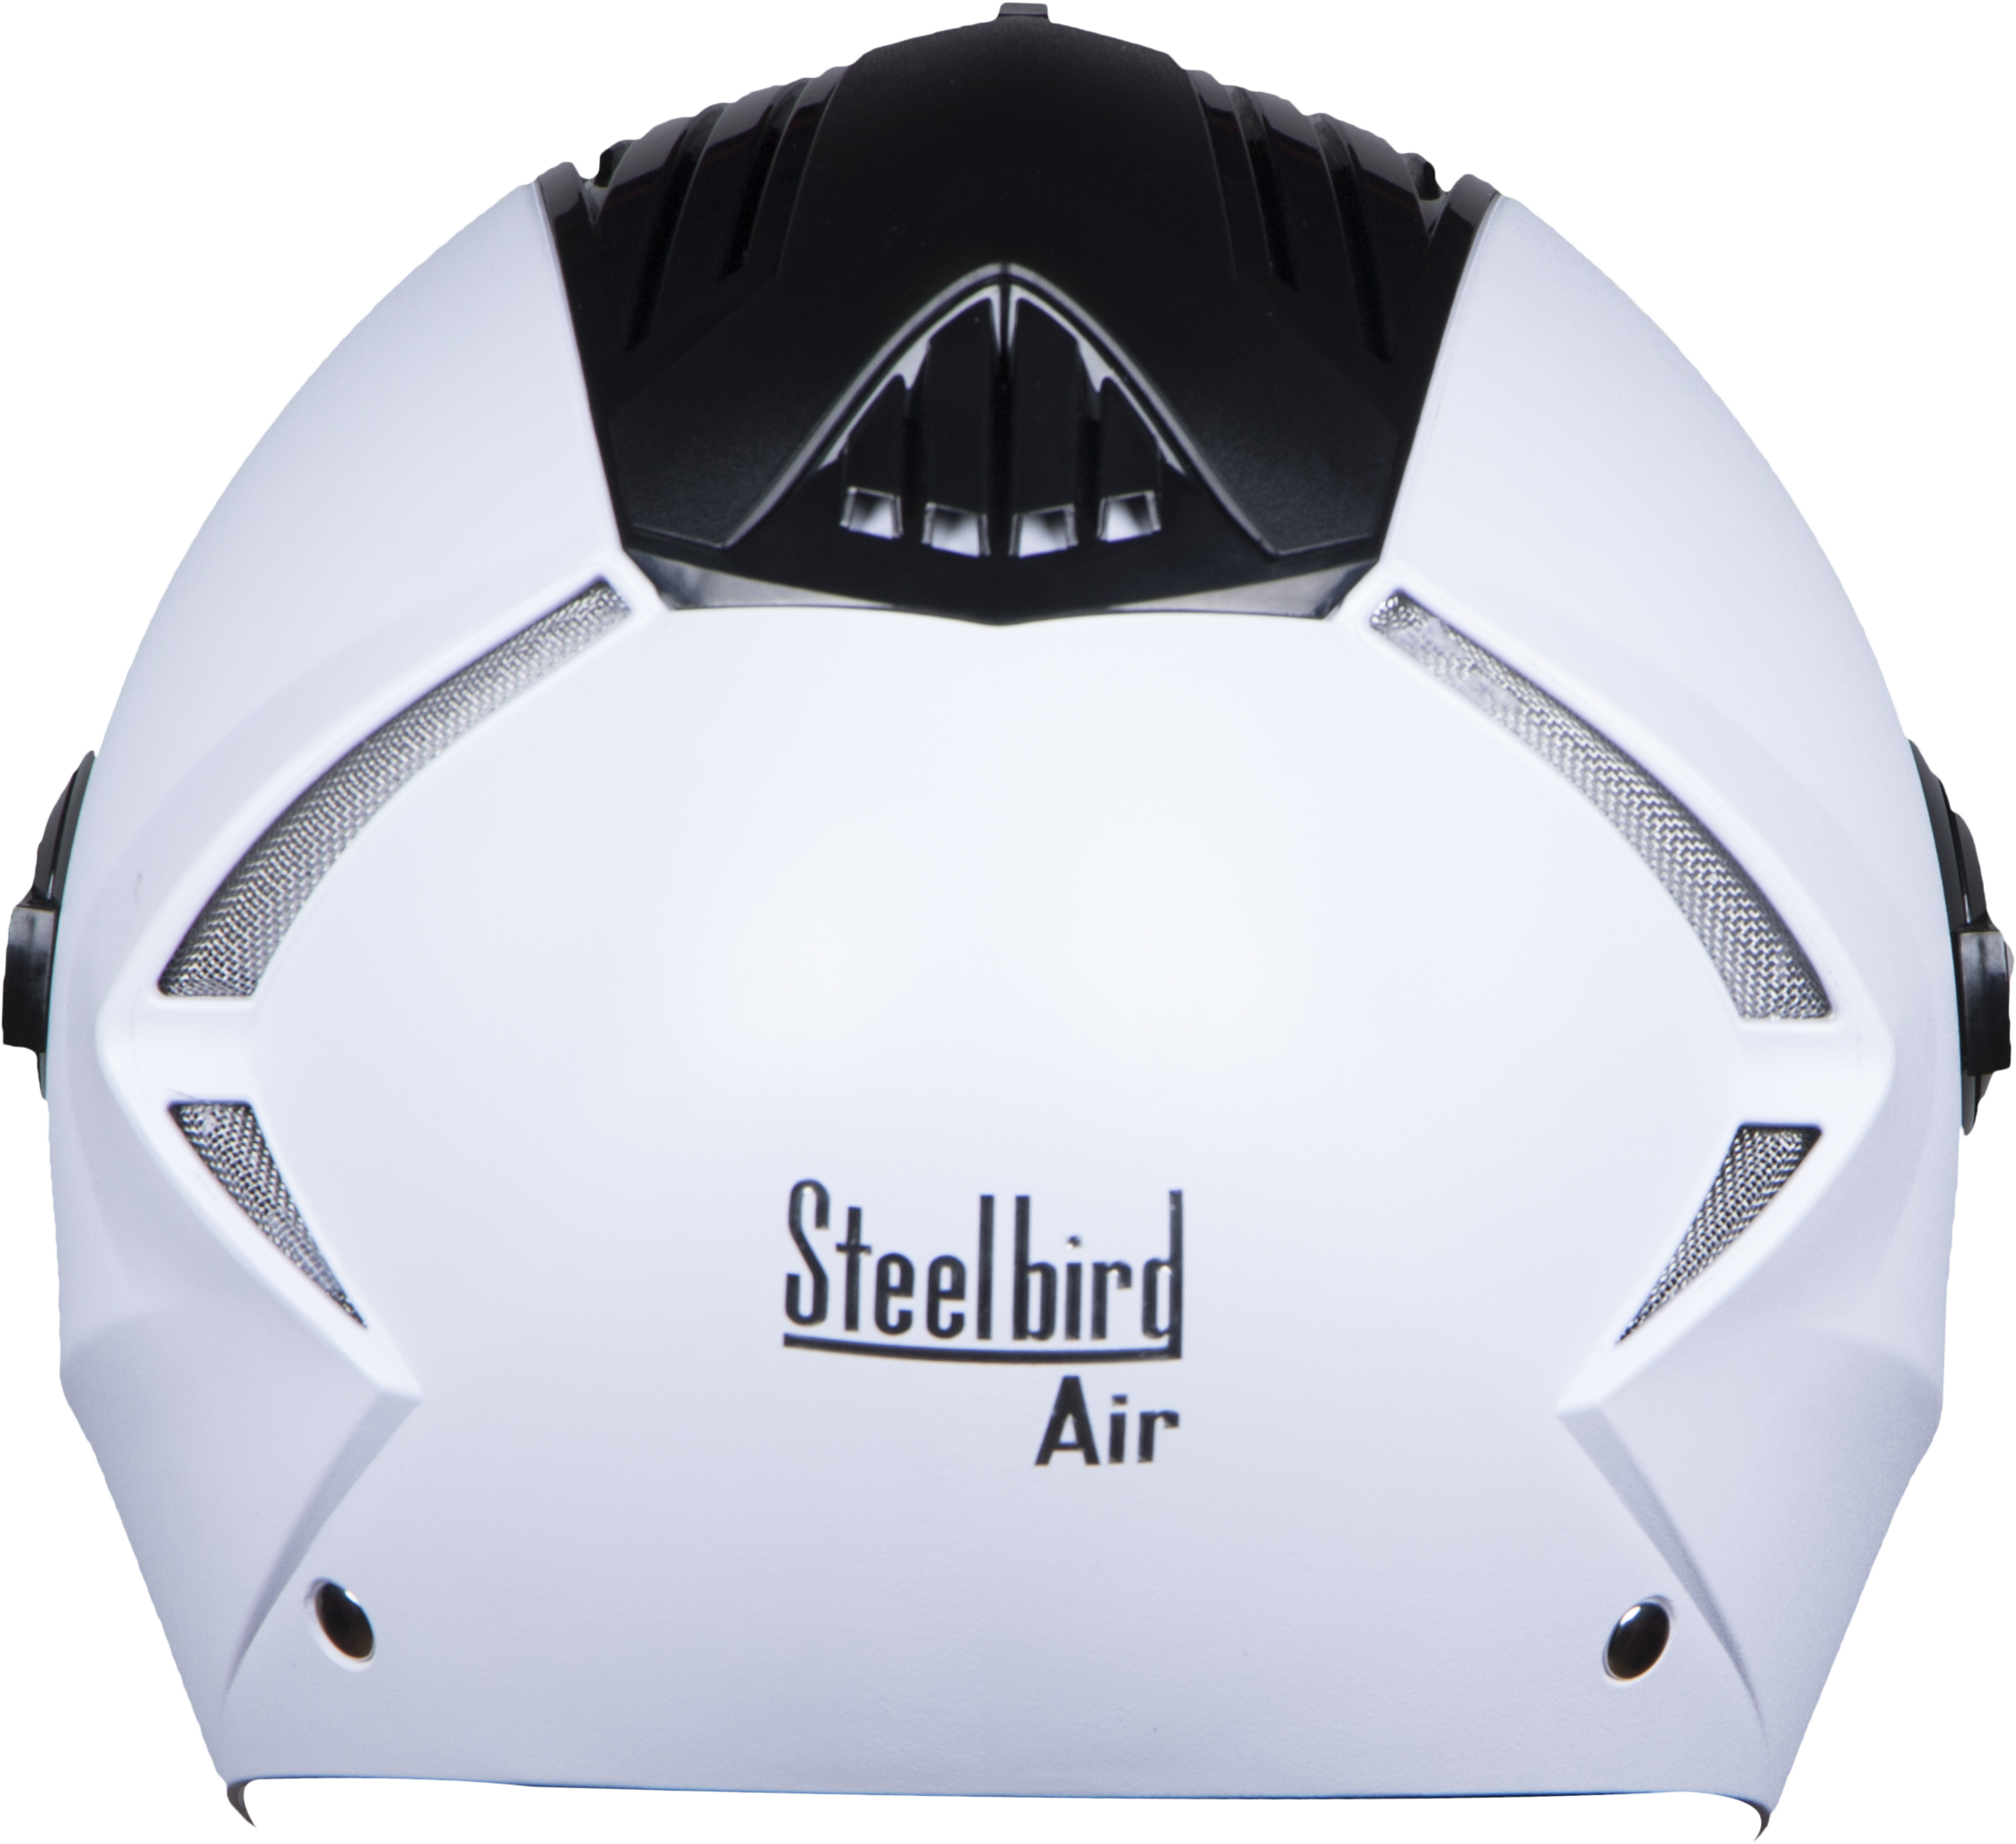 SBA-2 DASHING WHITE (FITTED WITH CLEAR VISOR EXTRA SILVER CHROME VISOR FREE)